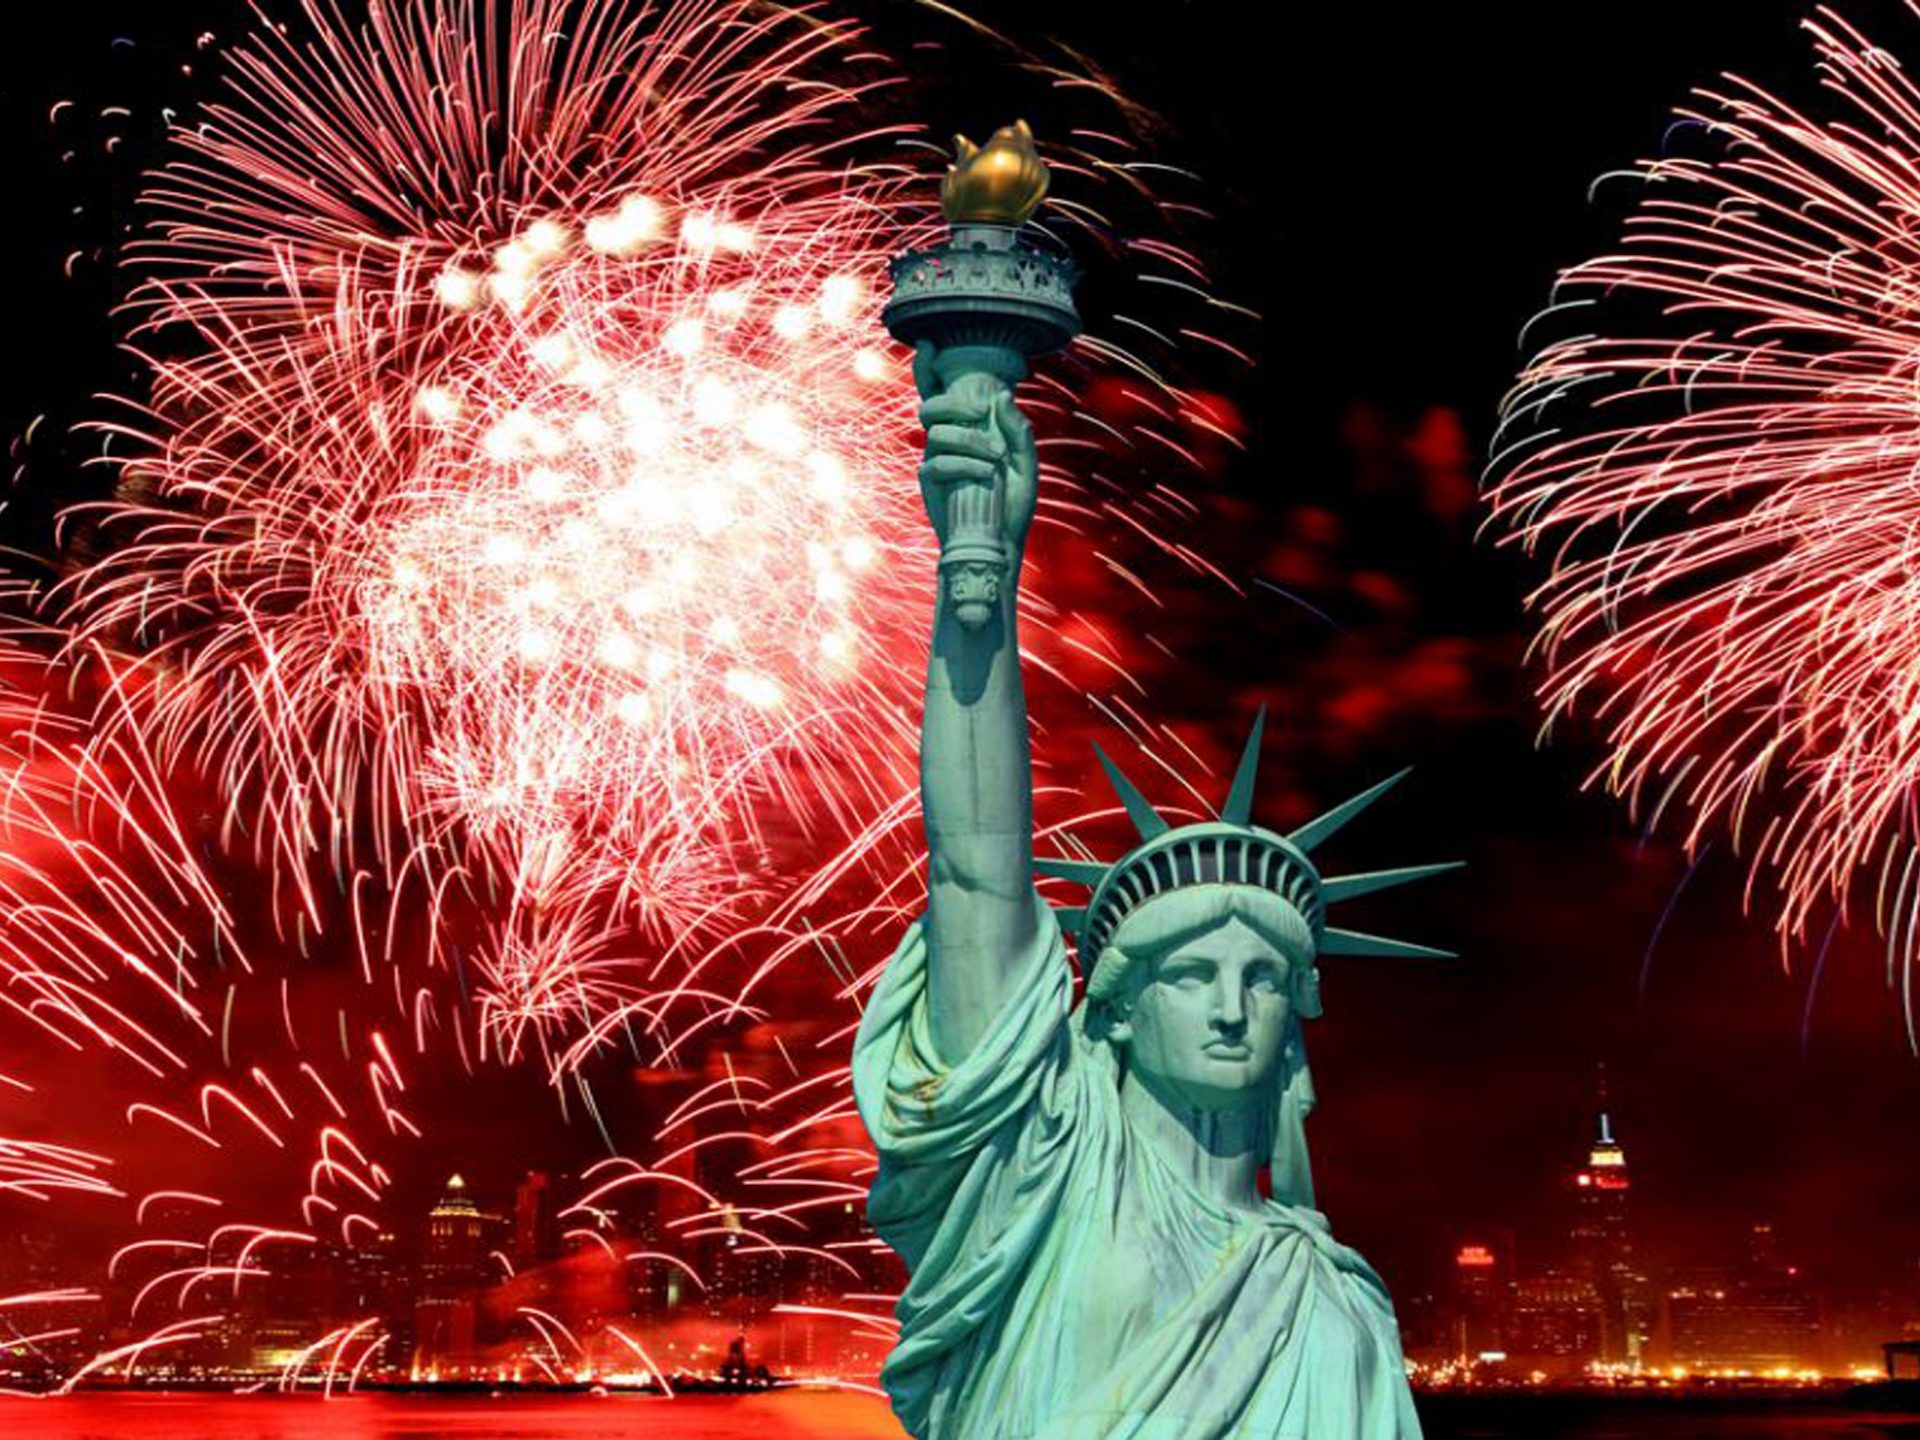 The Statue Of Liberty And 4th Of July Celebration Fireworks Desktop HD Wallpaper For Mobile Phones And Computer 3840x2400, Wallpaper13.com